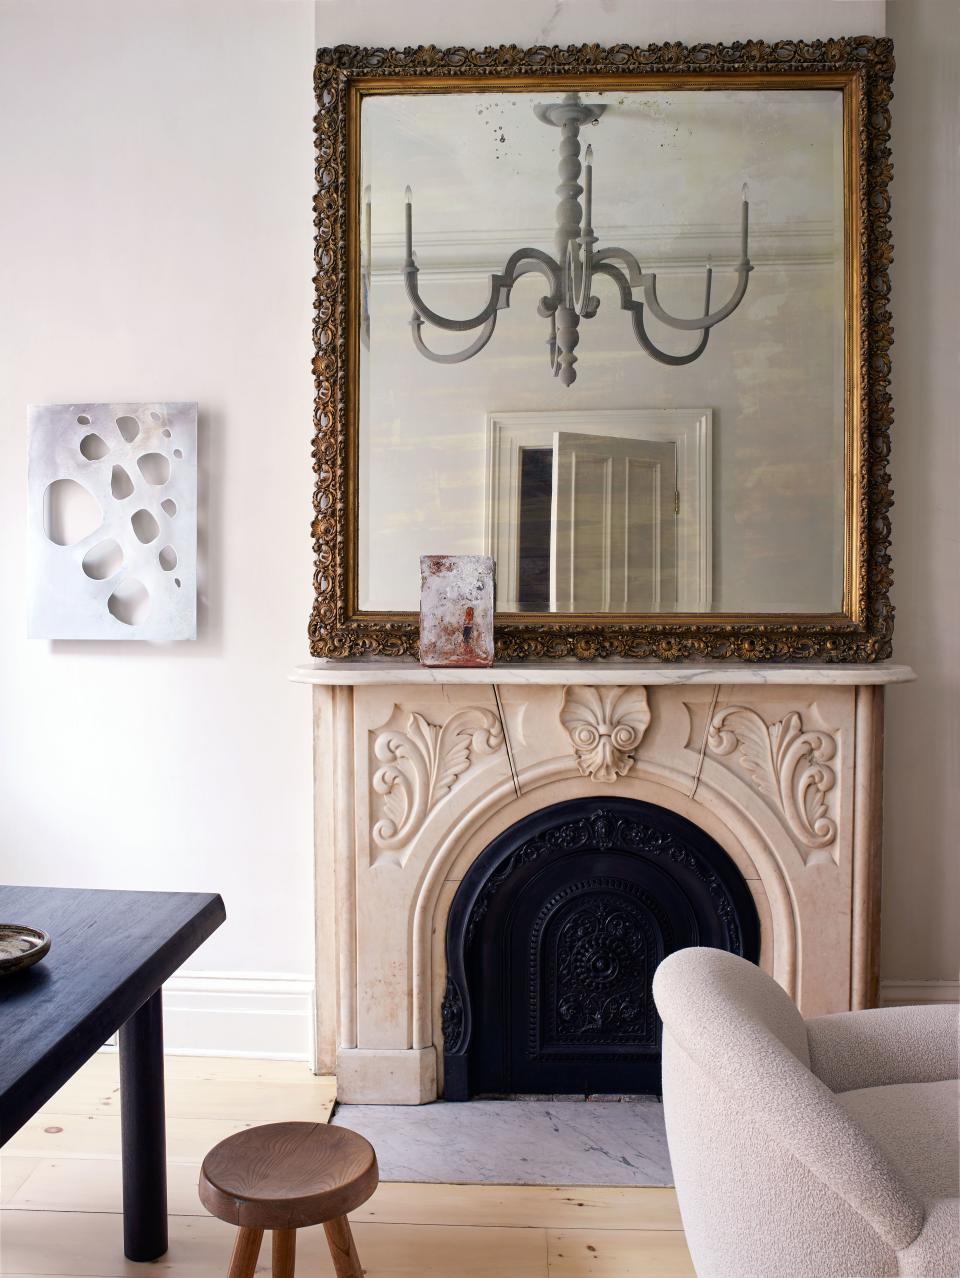 Tedhams used raw Marmorino plaster (finished with beeswax to add a subtle sheen) on the walls of the home’s parlor level. The fireplace, mantel, and mirror, which are original to the house, were paired with a slim custom-designed wooden chandelier and an abstract metal panel made by the designer, who holds a Master of Fine Arts from the University of Illinois at Chicago.